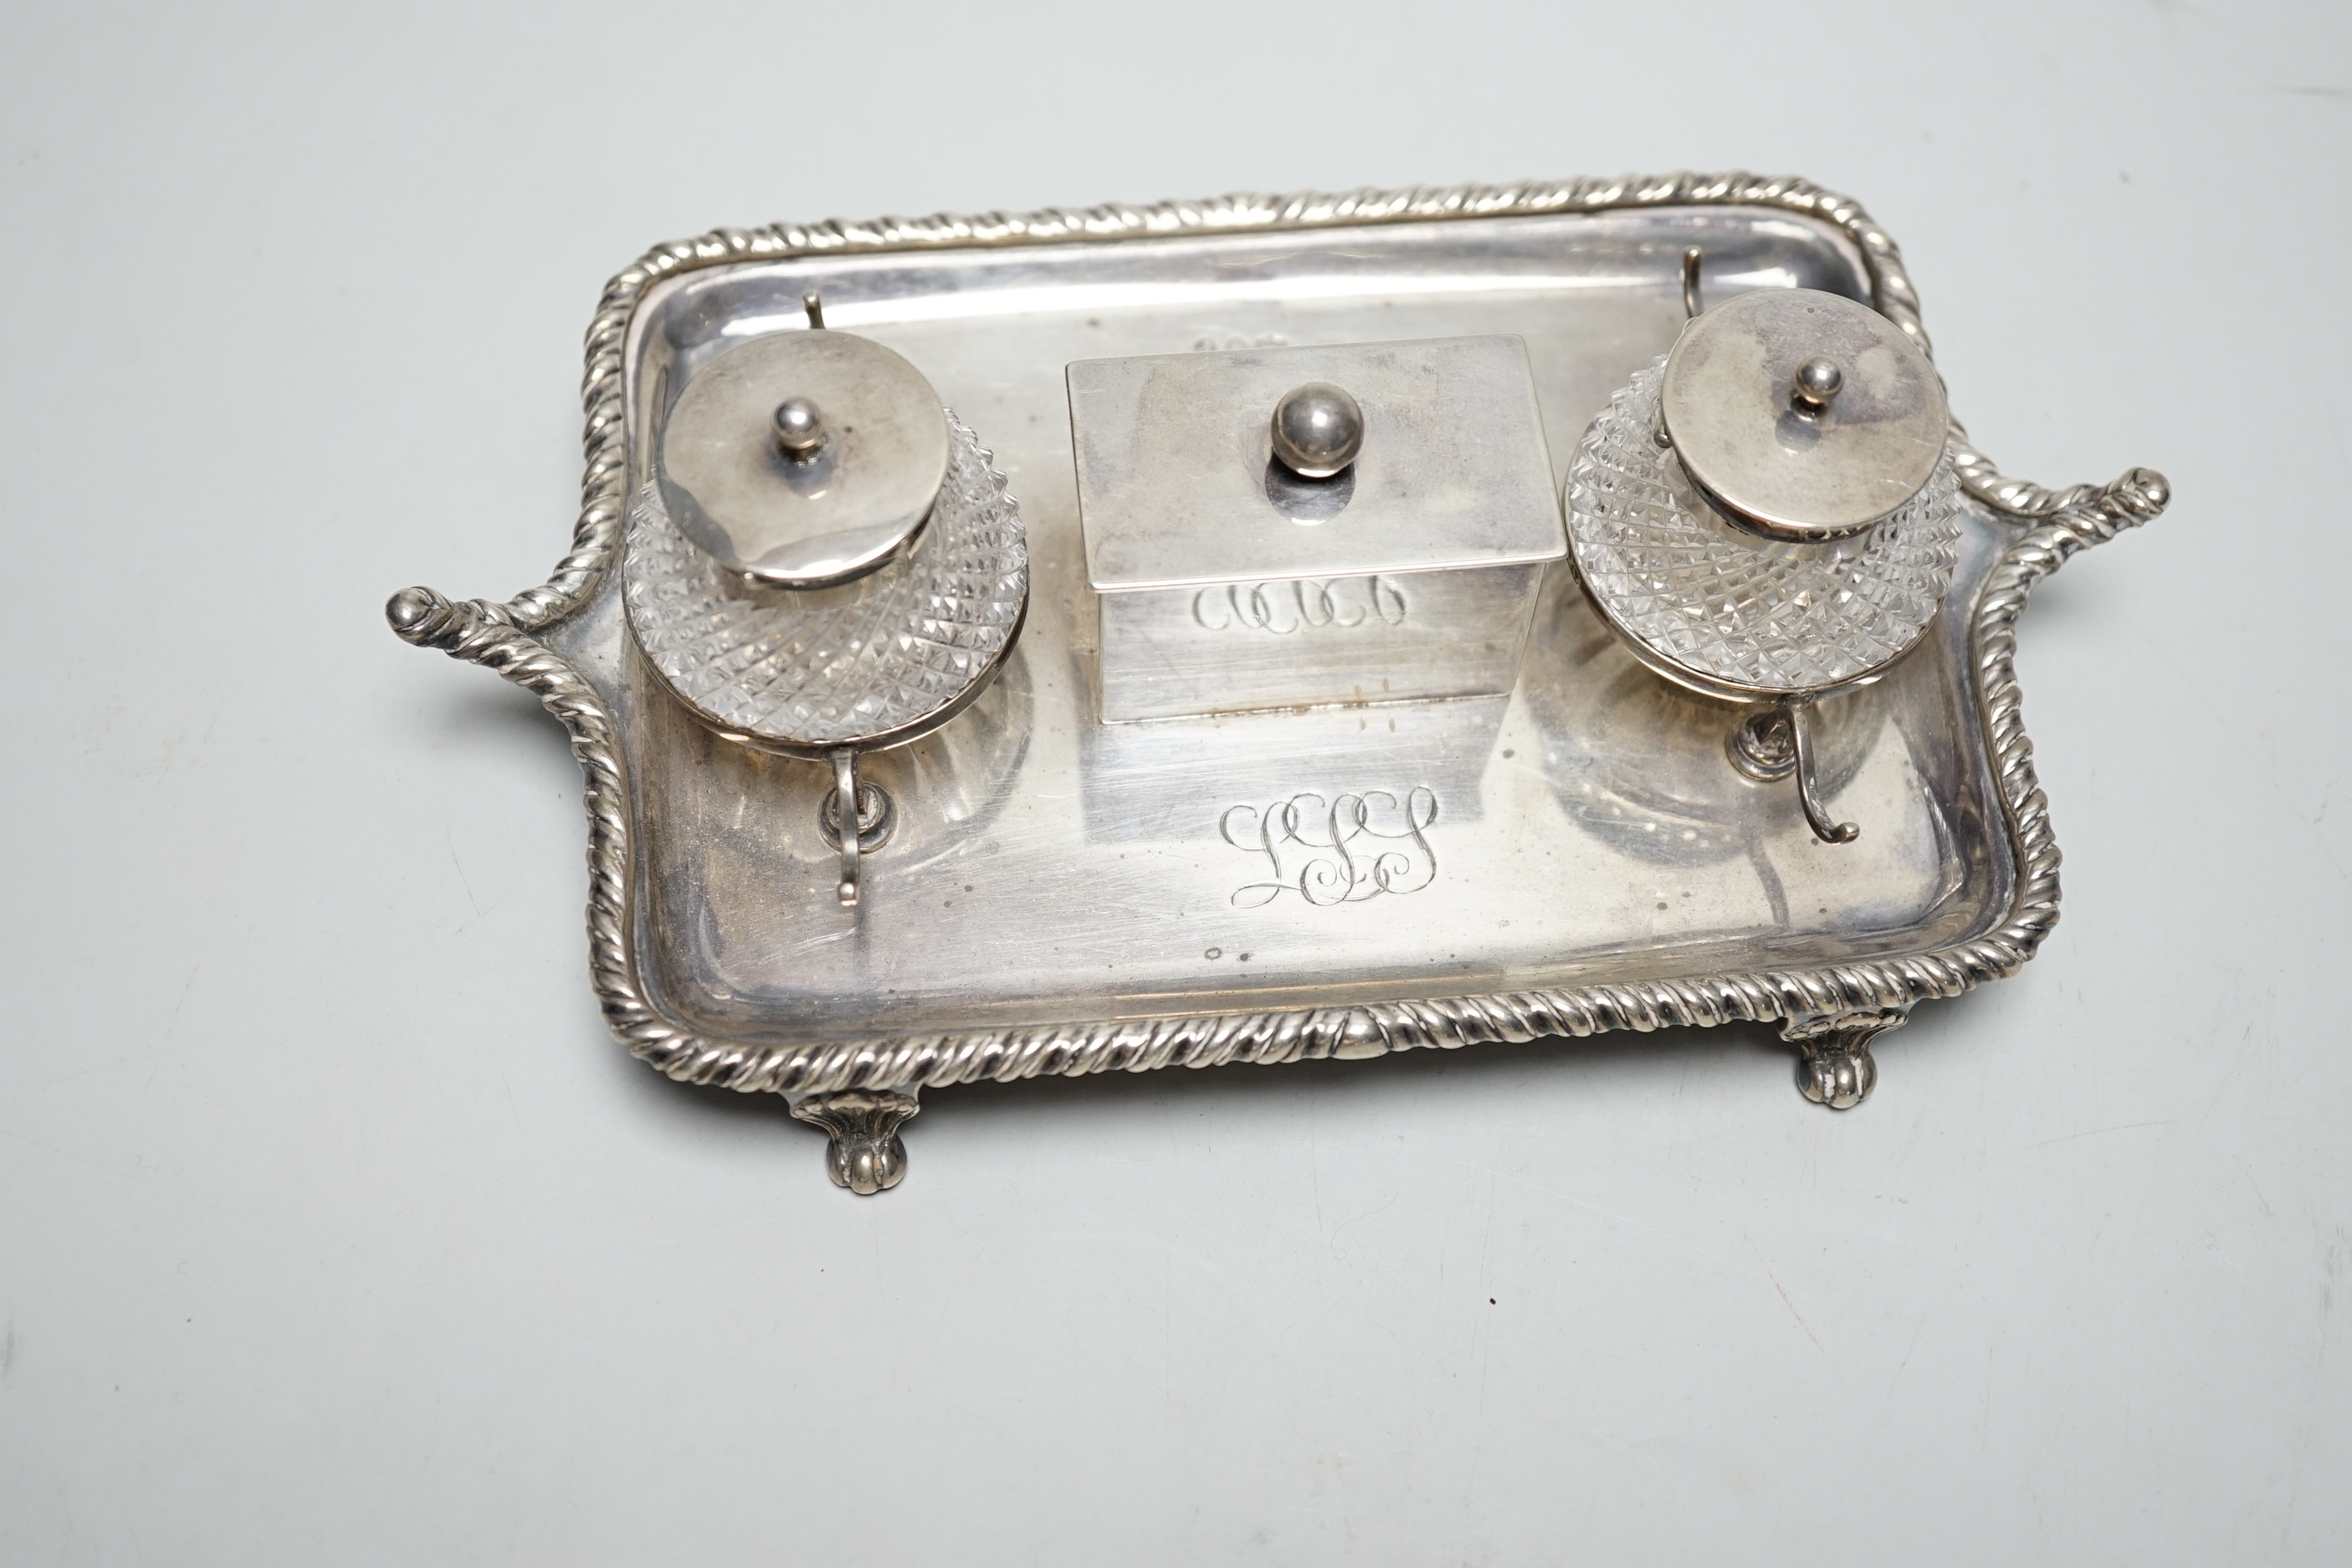 A late Victorian silver rectangular inkstand, with two mounted cut glass wells, central lidded compartment and two pen rests, Edward Hutton, London, 1890, 19cm, weighable silver 9oz.